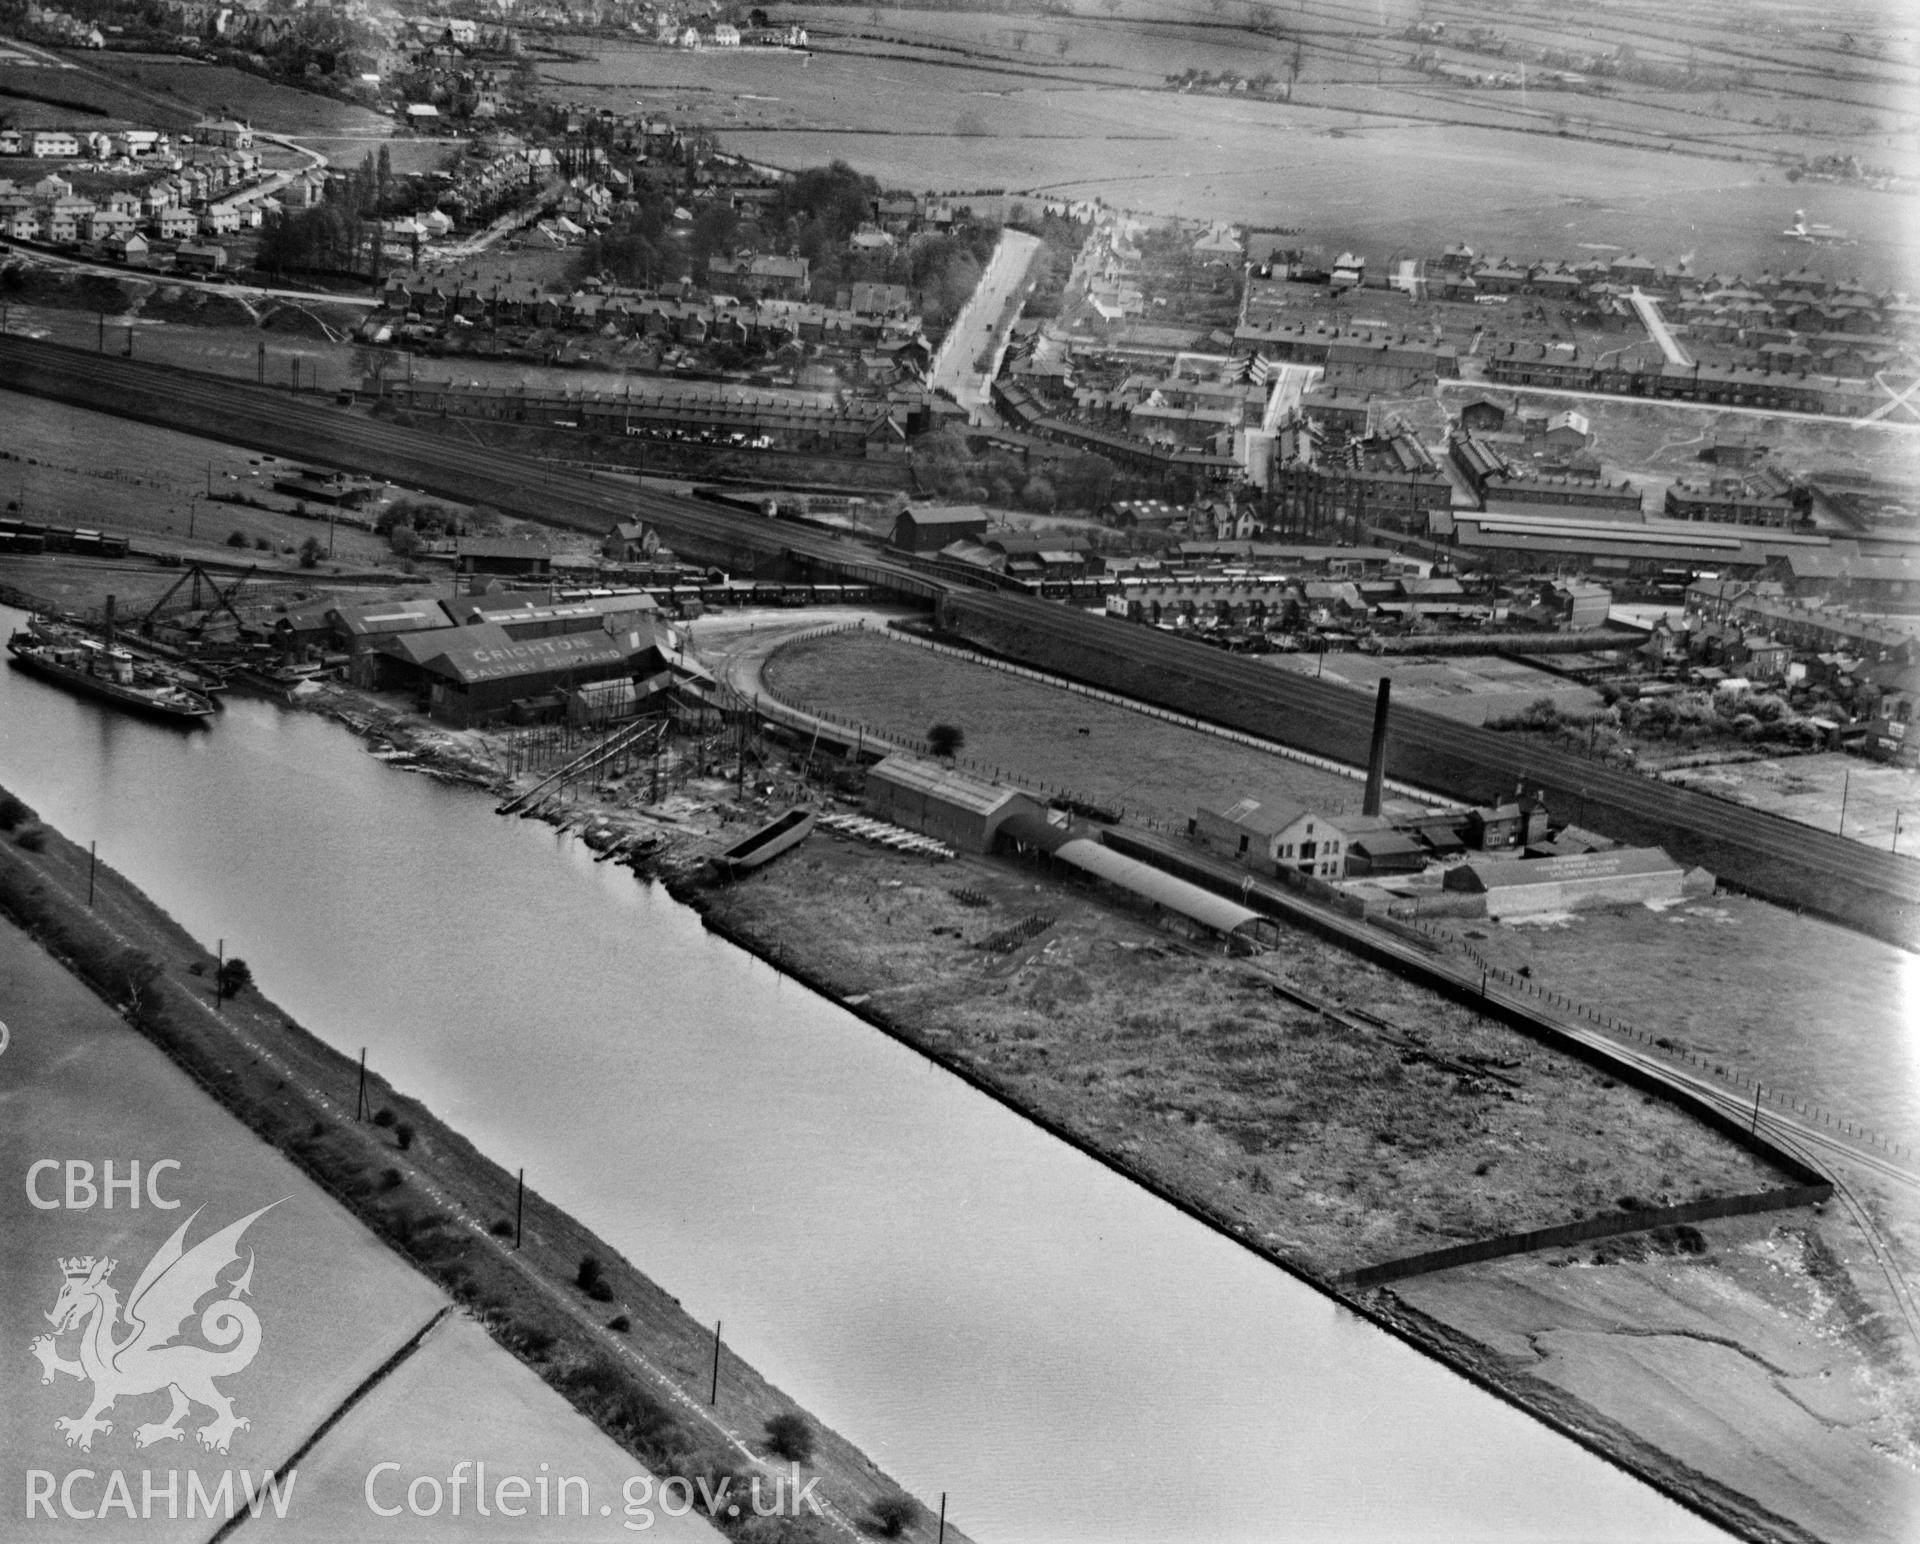 View of Crichton's shipyard, Saltney, oblique aerial view. 5?x4? black and white glass plate negative.